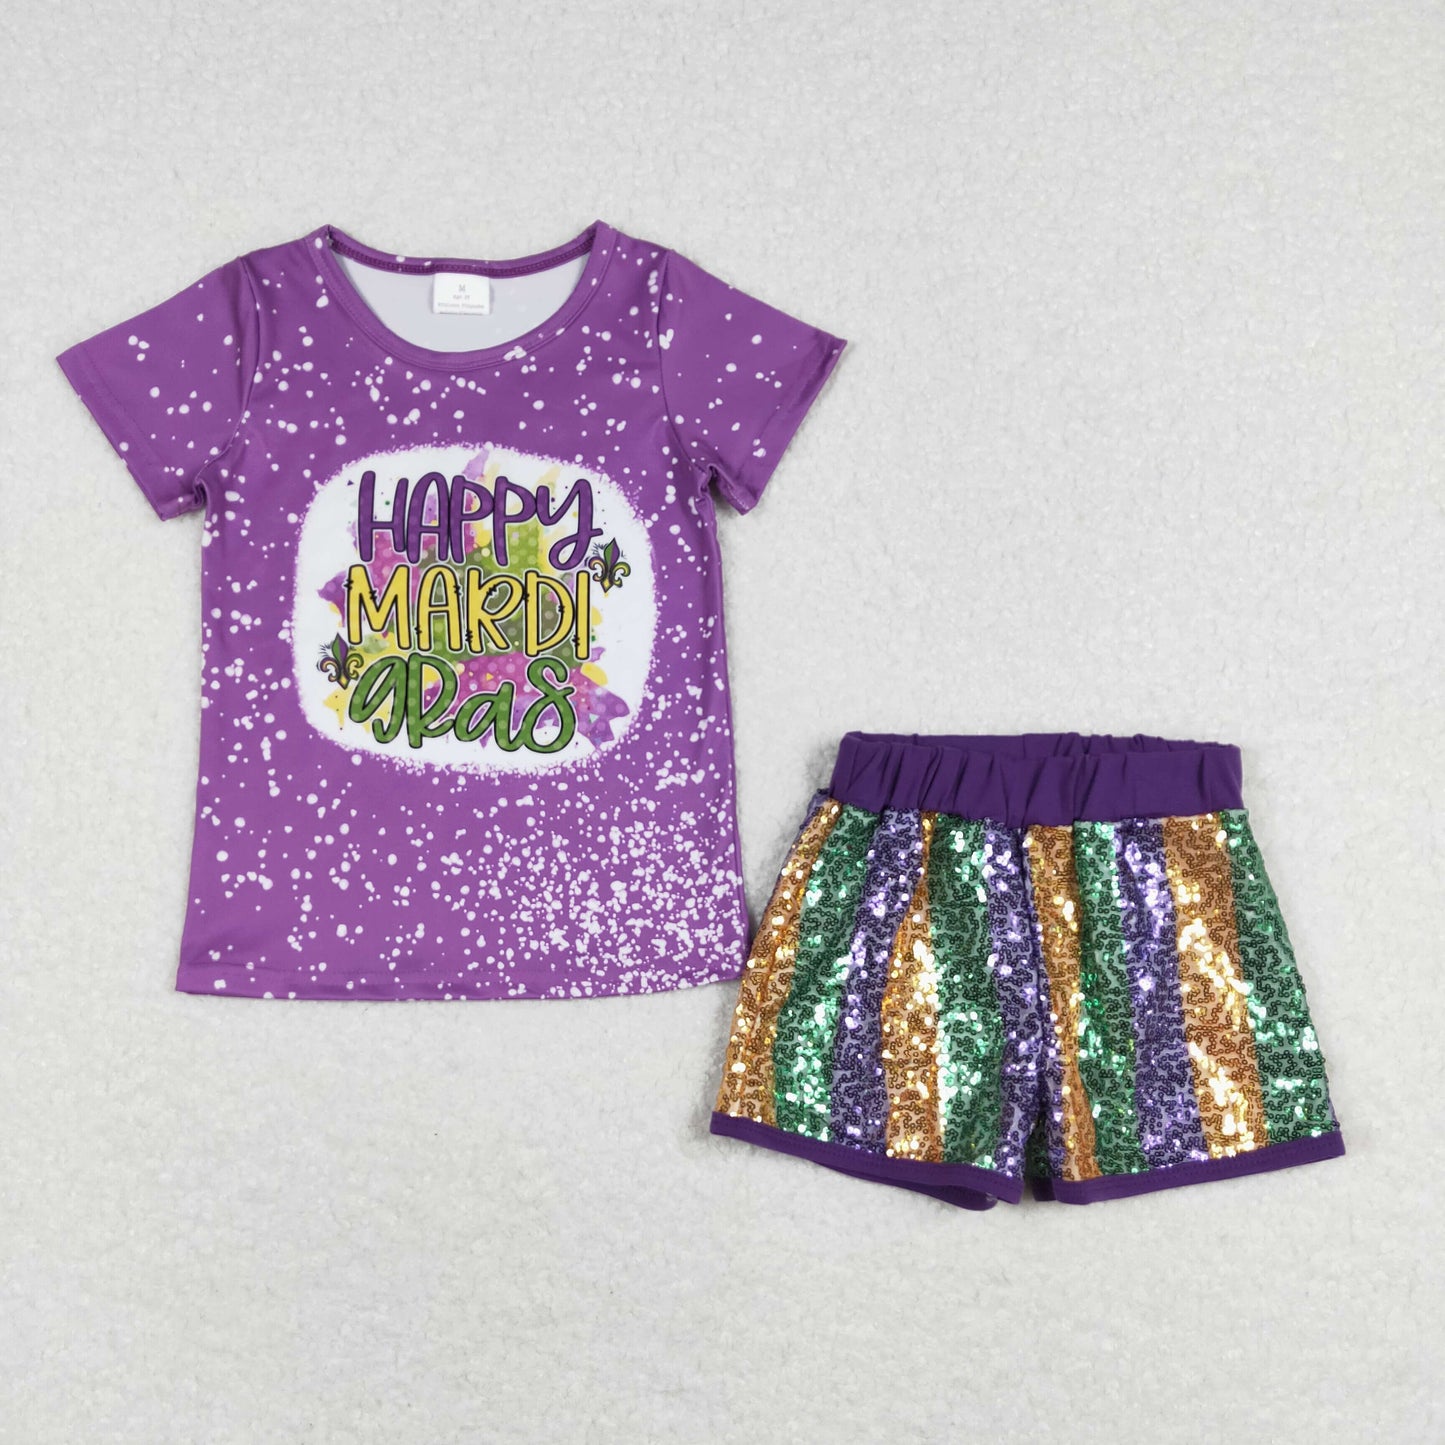 GSSO0528 Purple Happy Mardi Gras Top Sequined Shorts Outfits